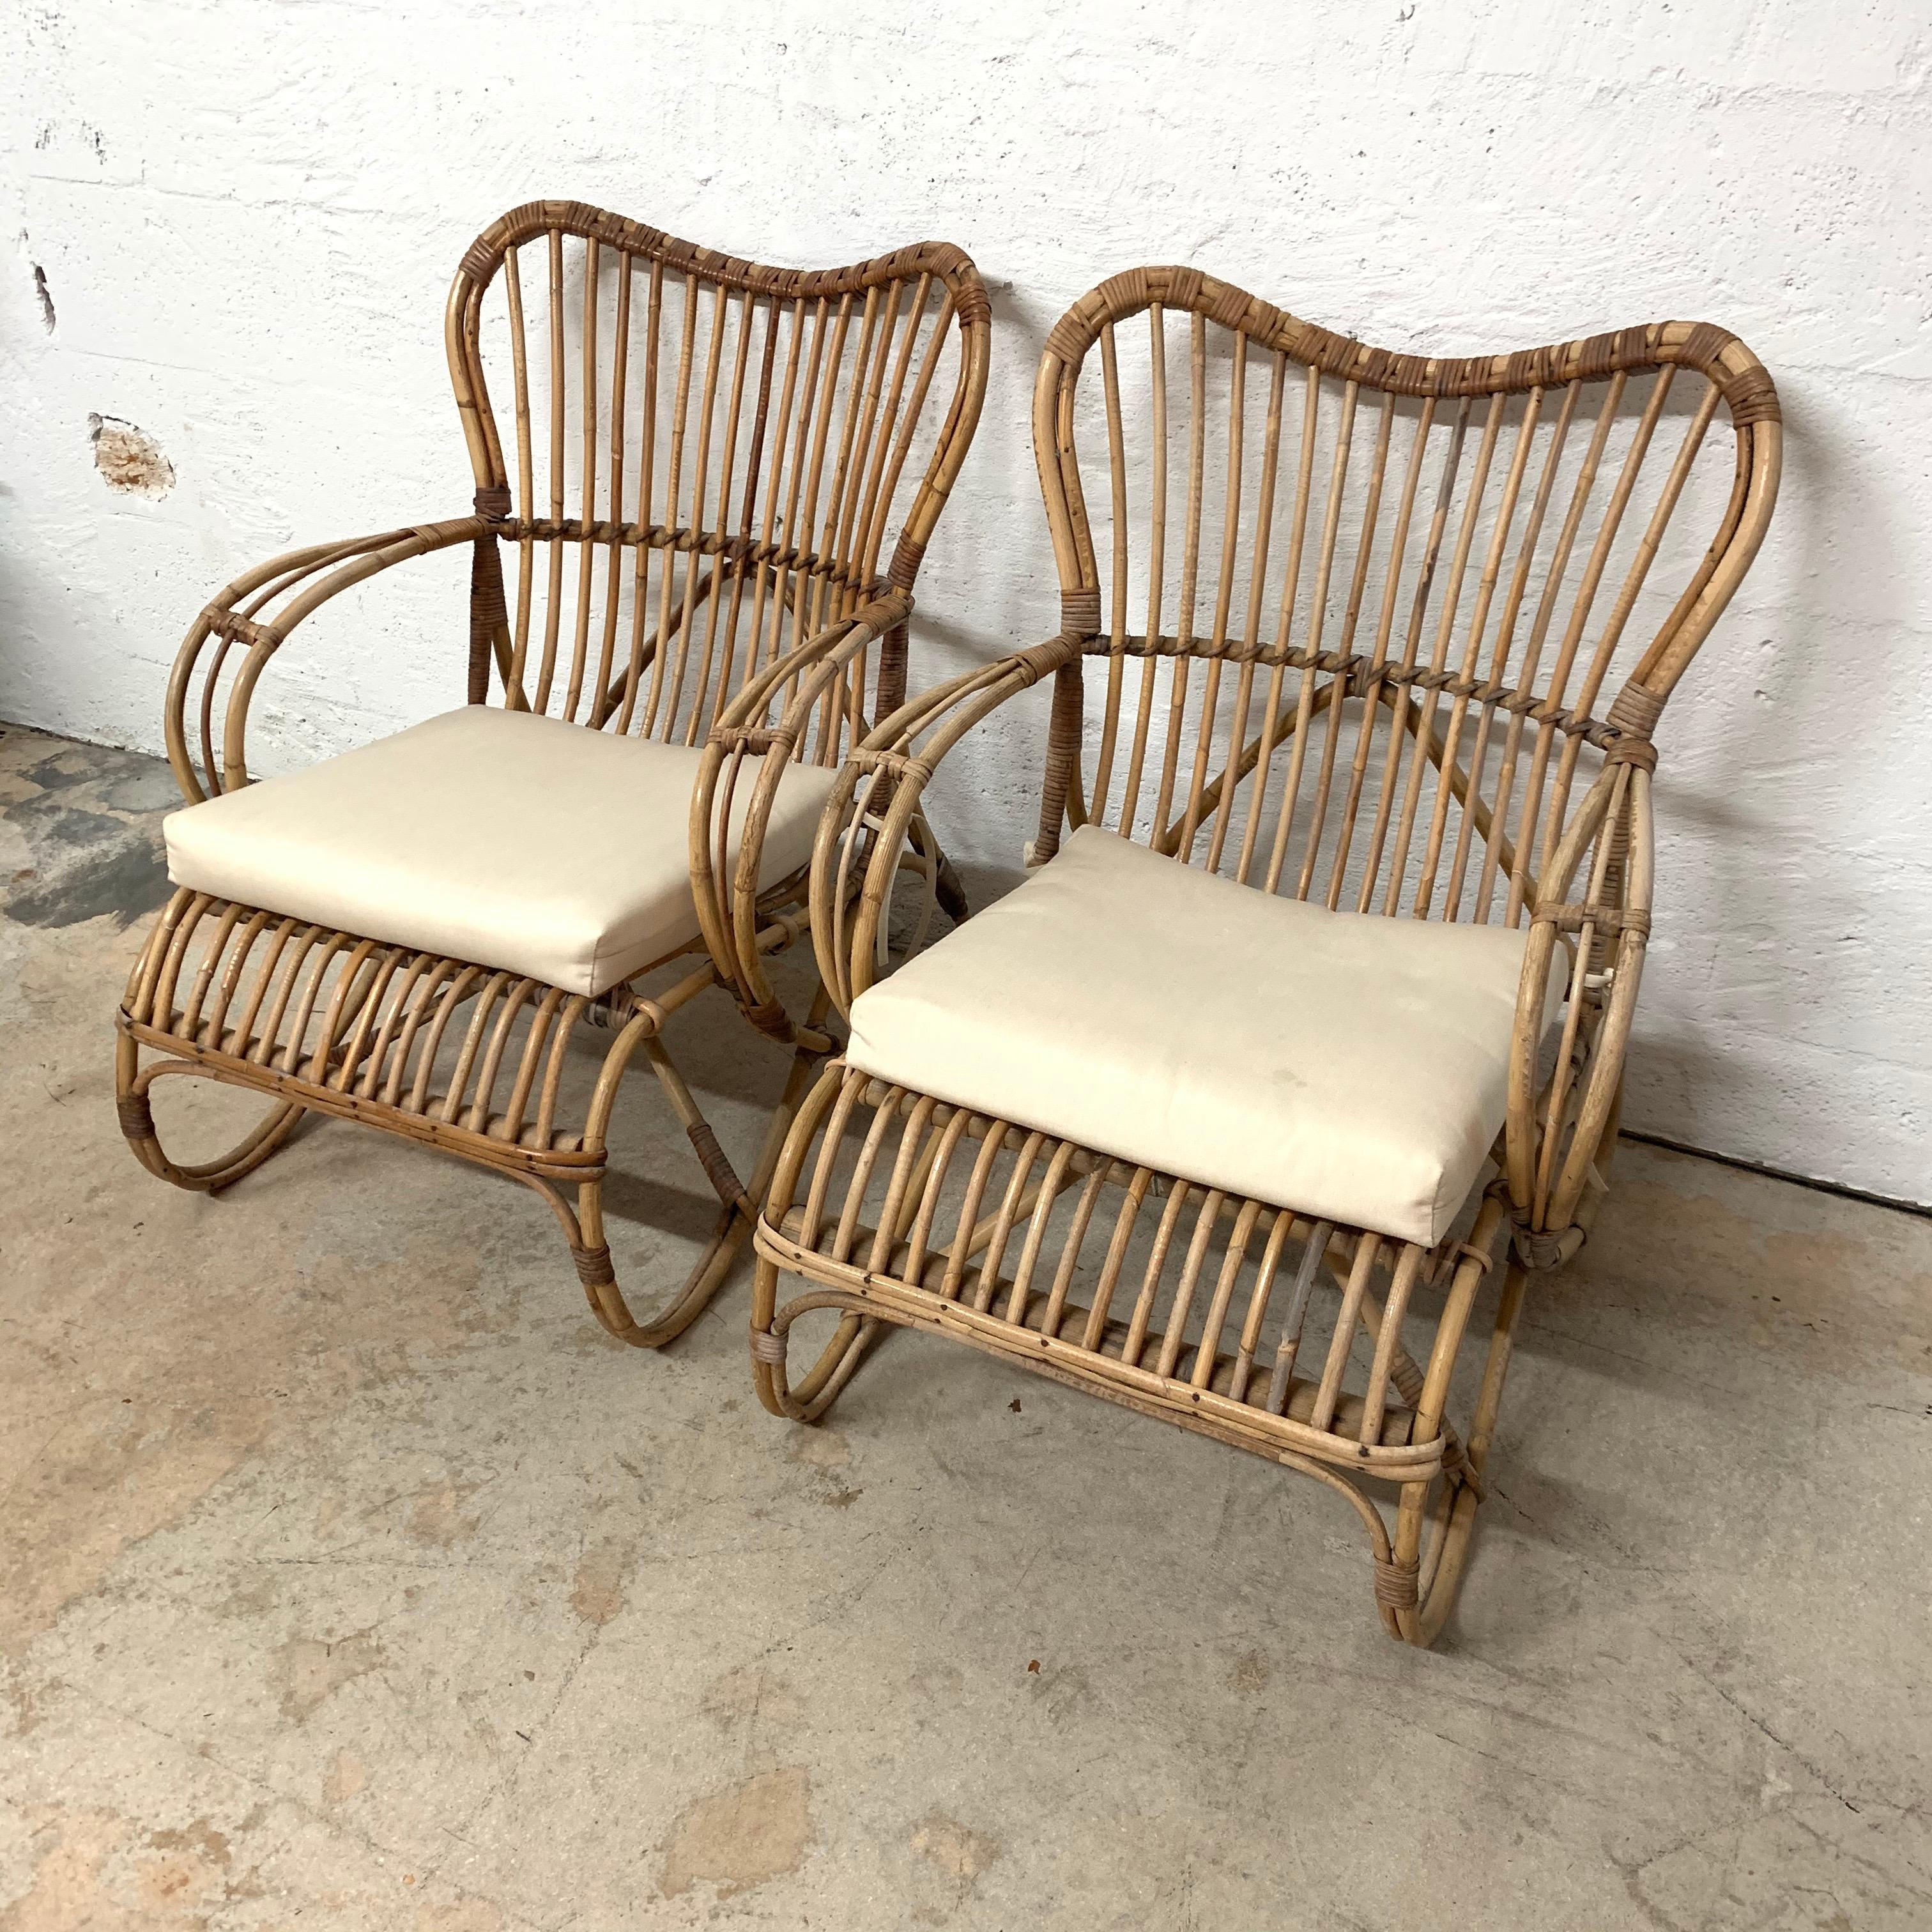 Unique pair of Italian chairs rendered in rattan and wicker with beige off-white cushions.

Rattan, wicker and bamboo.